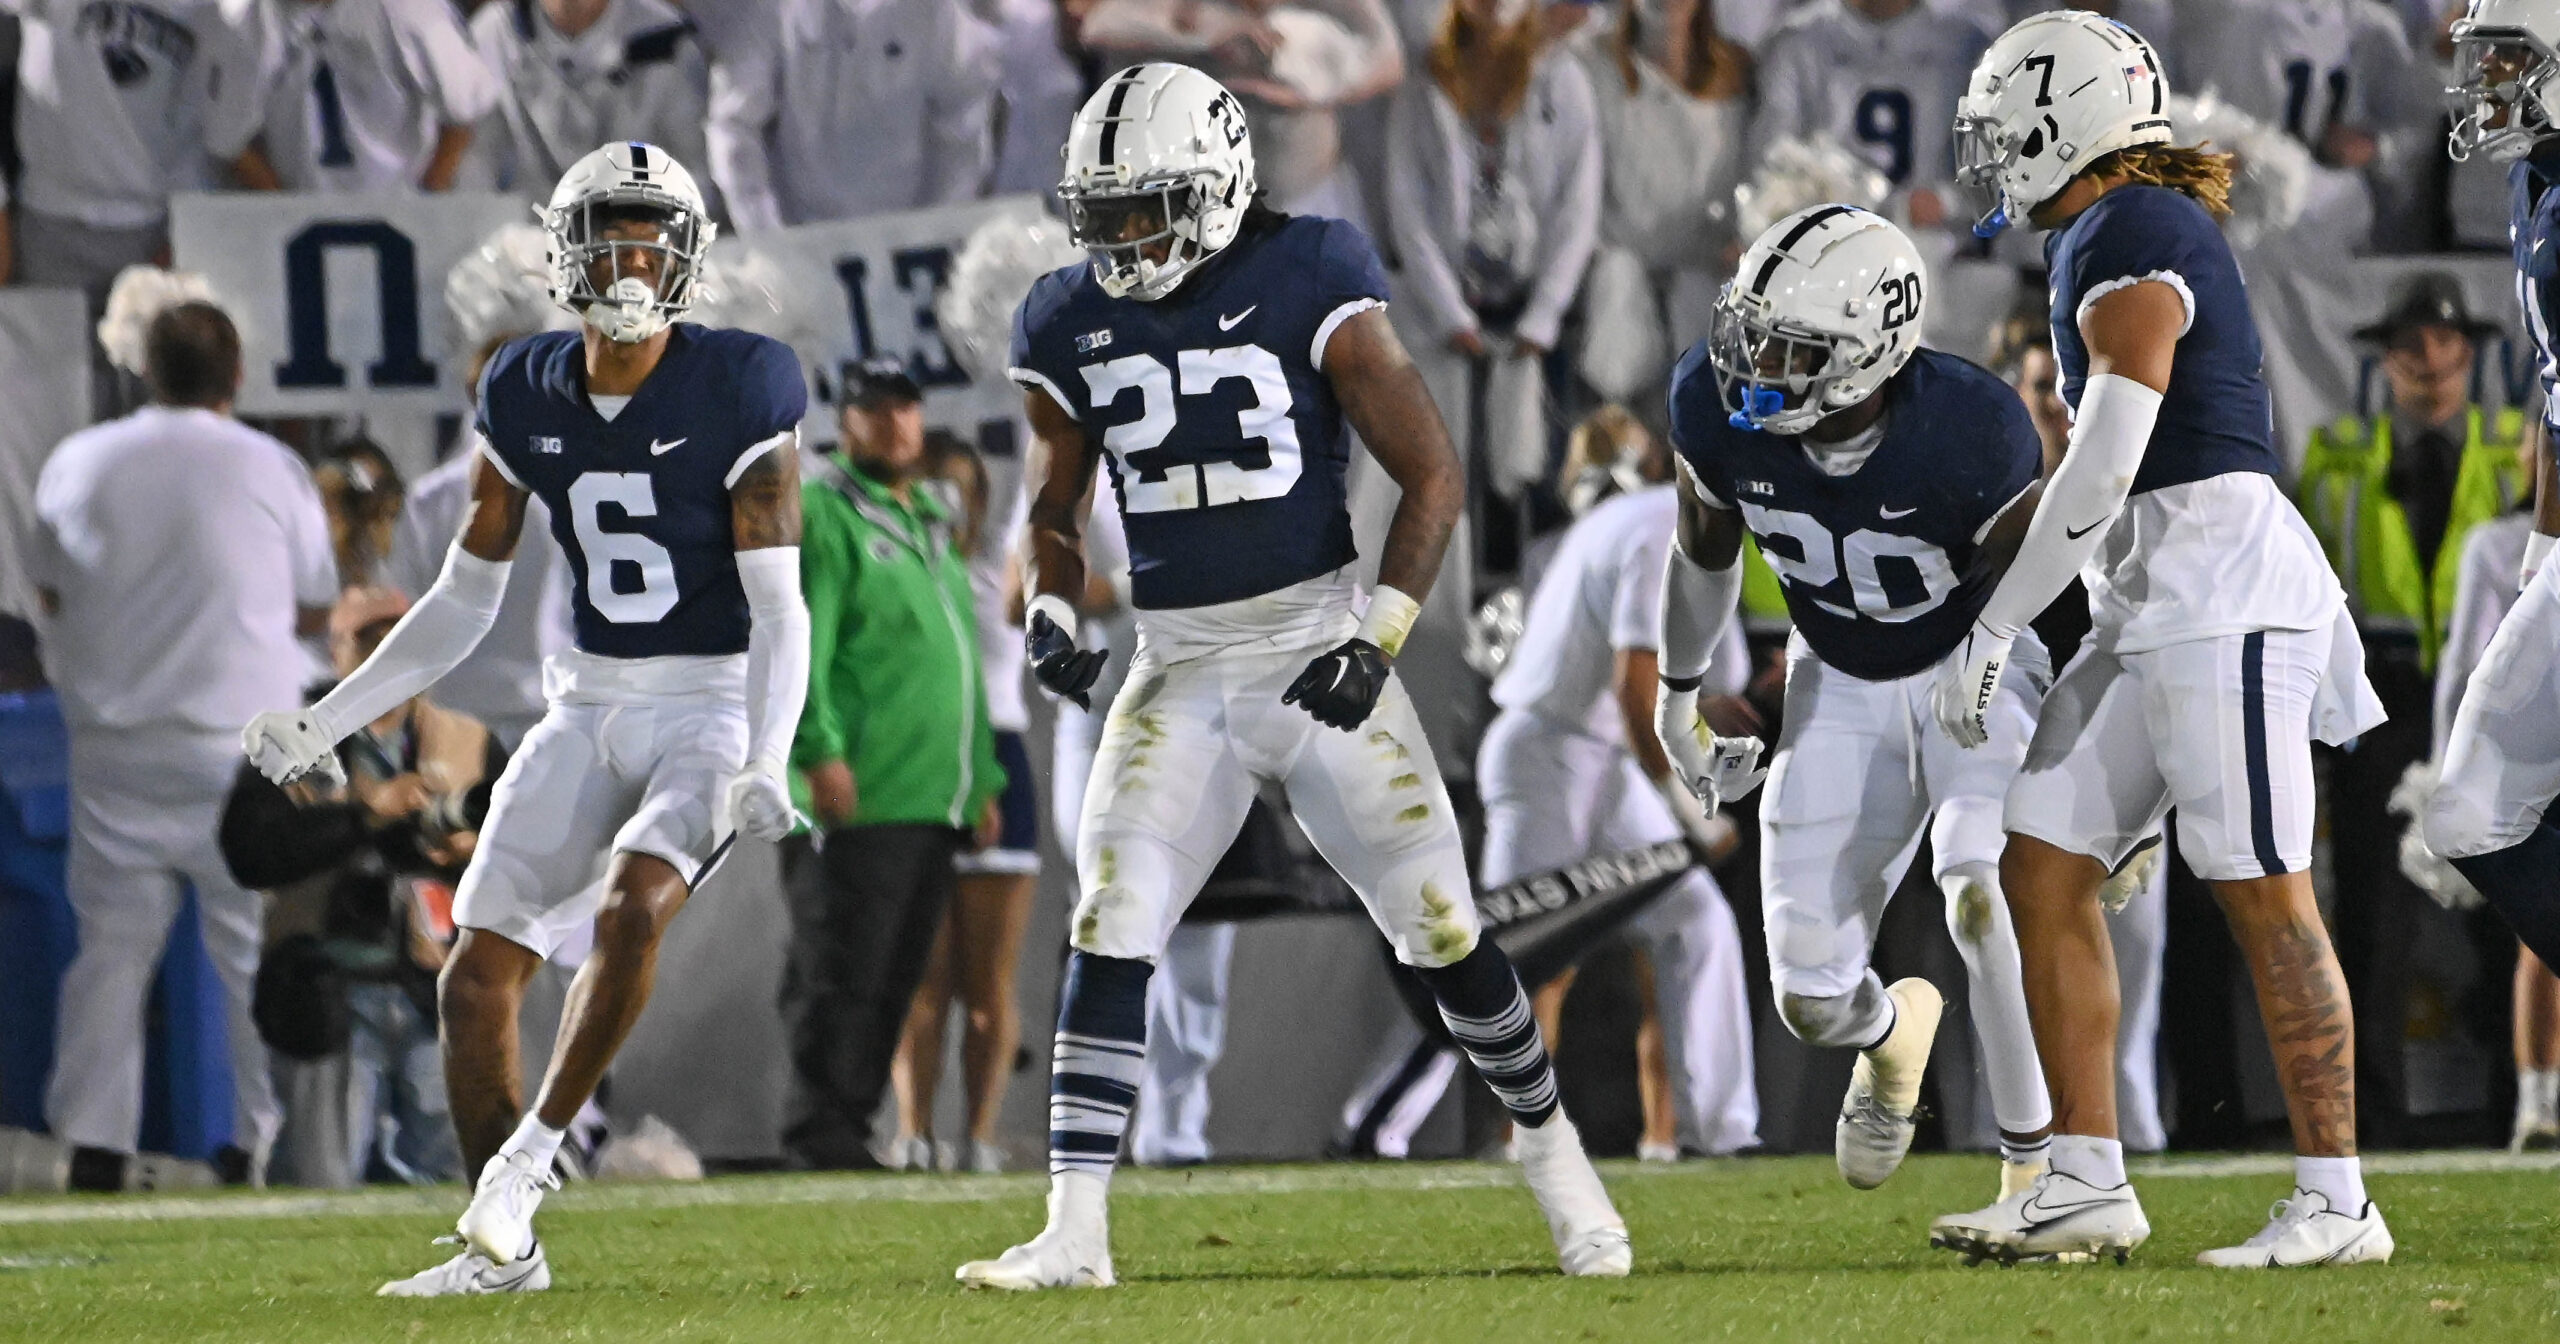 How did Penn State's players perform vs. Minnesota? PFF Snap Counts